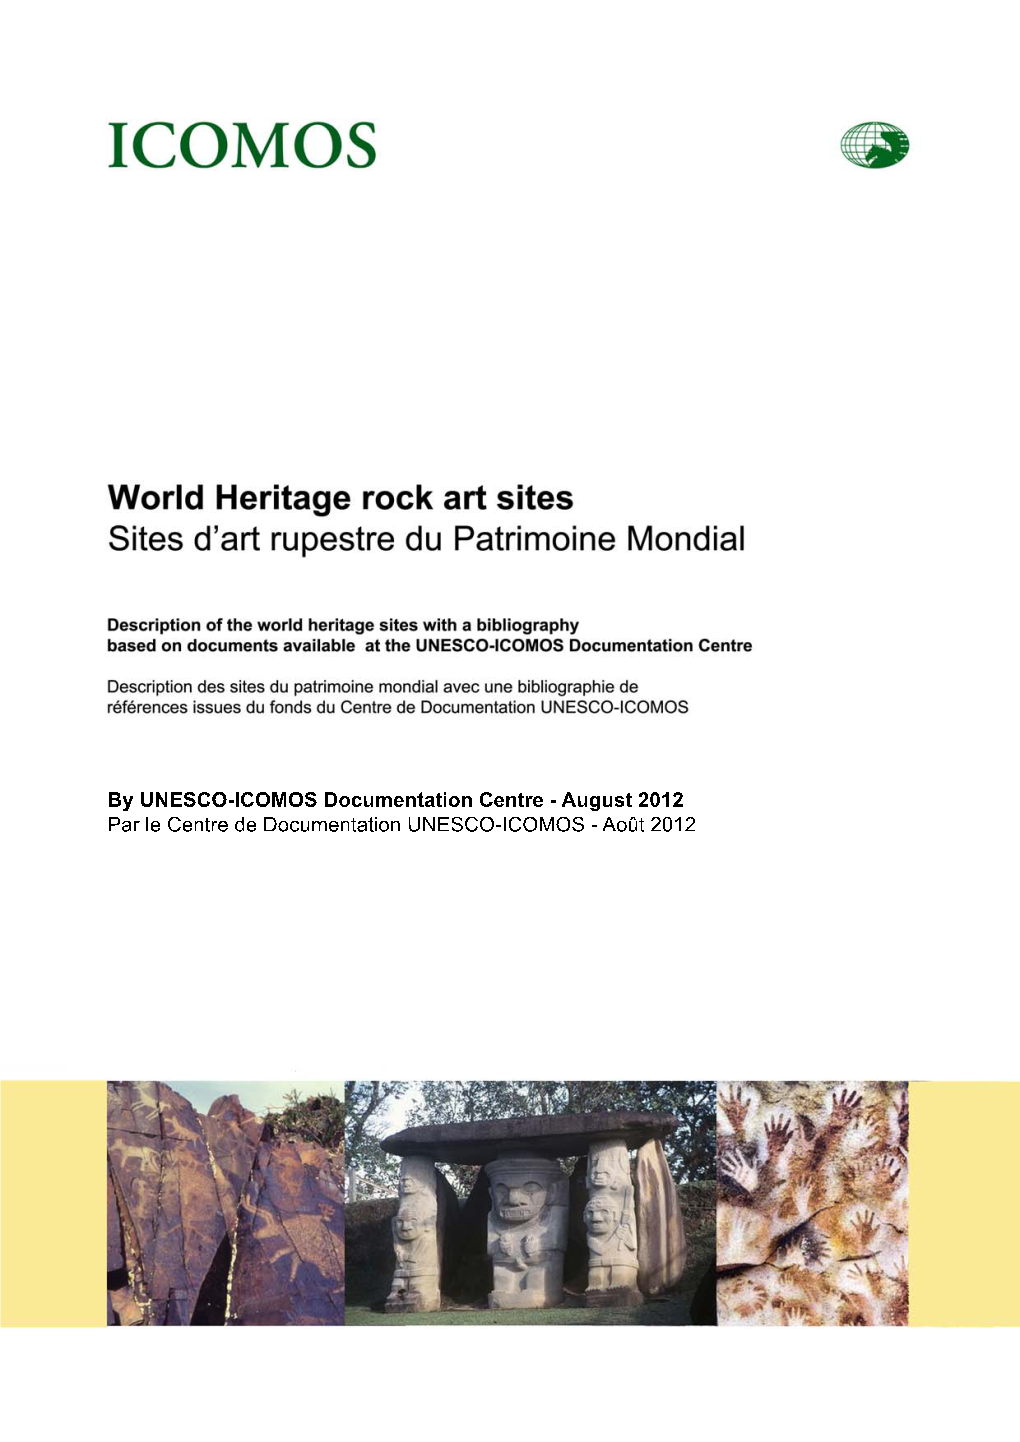 Rock Art Sites in the World Heritage List